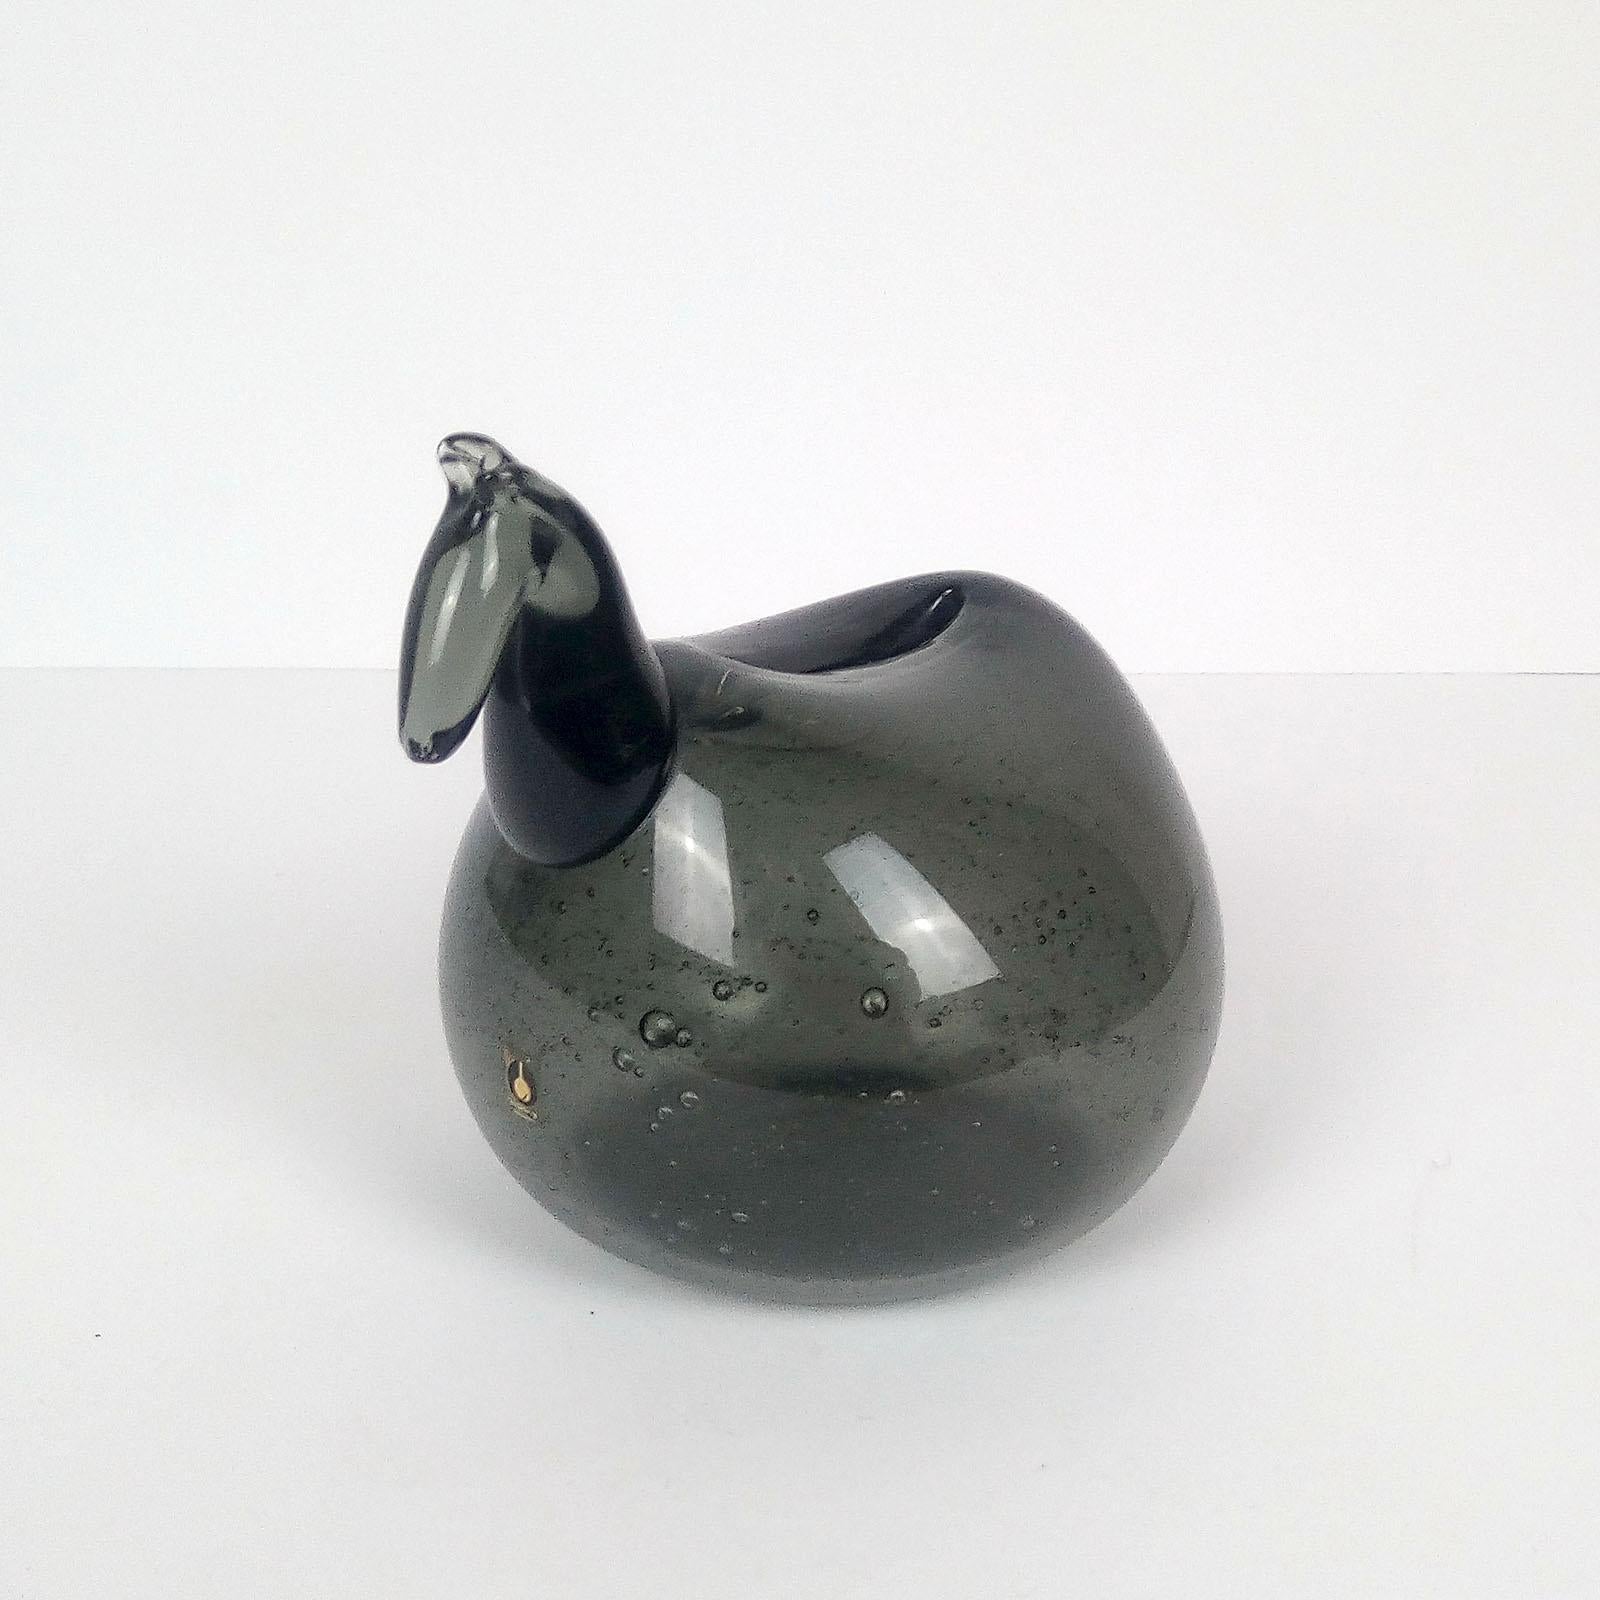 Very rare midcentury glass piggy bank by Goran Warff for Pukeberg, Sweden, 1962.
Glass horse sculpture in the form of a piggy bank, signed and dated 1962. Original manufacturer label to the front. In excellent condition.
Dimensions: Height 11 cm,